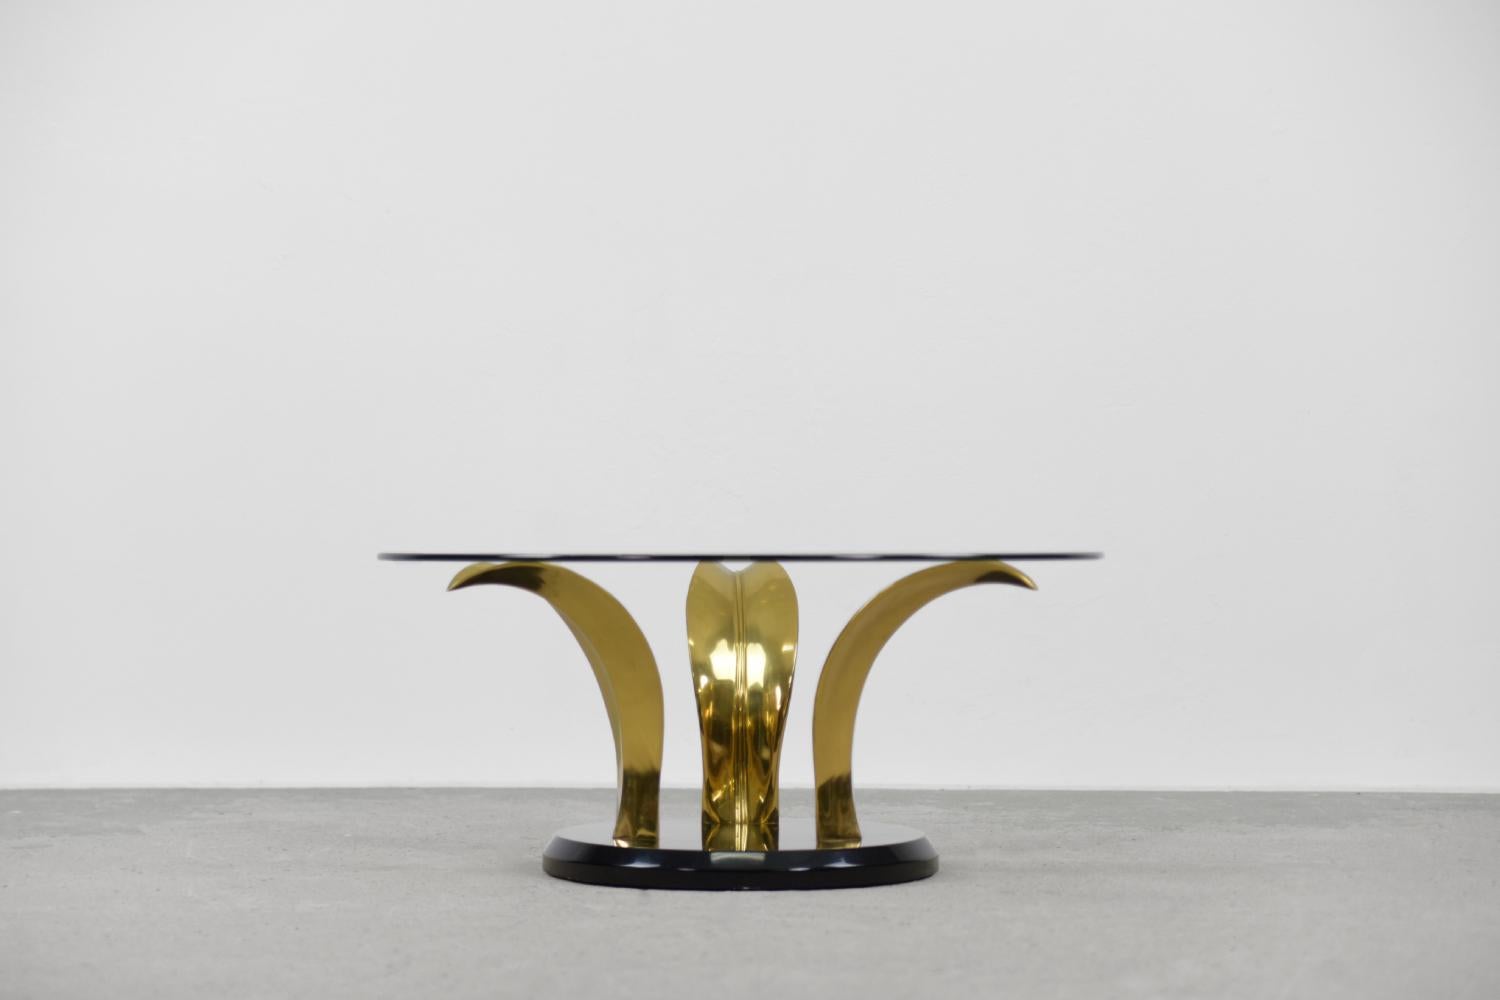 This very rare cocktail table was made in the United States during the 1970s. The striking base consists of three palm leaves made of brass and mounted on a black lacquered stone base. The round top is made of thick tempered glass. The table refers